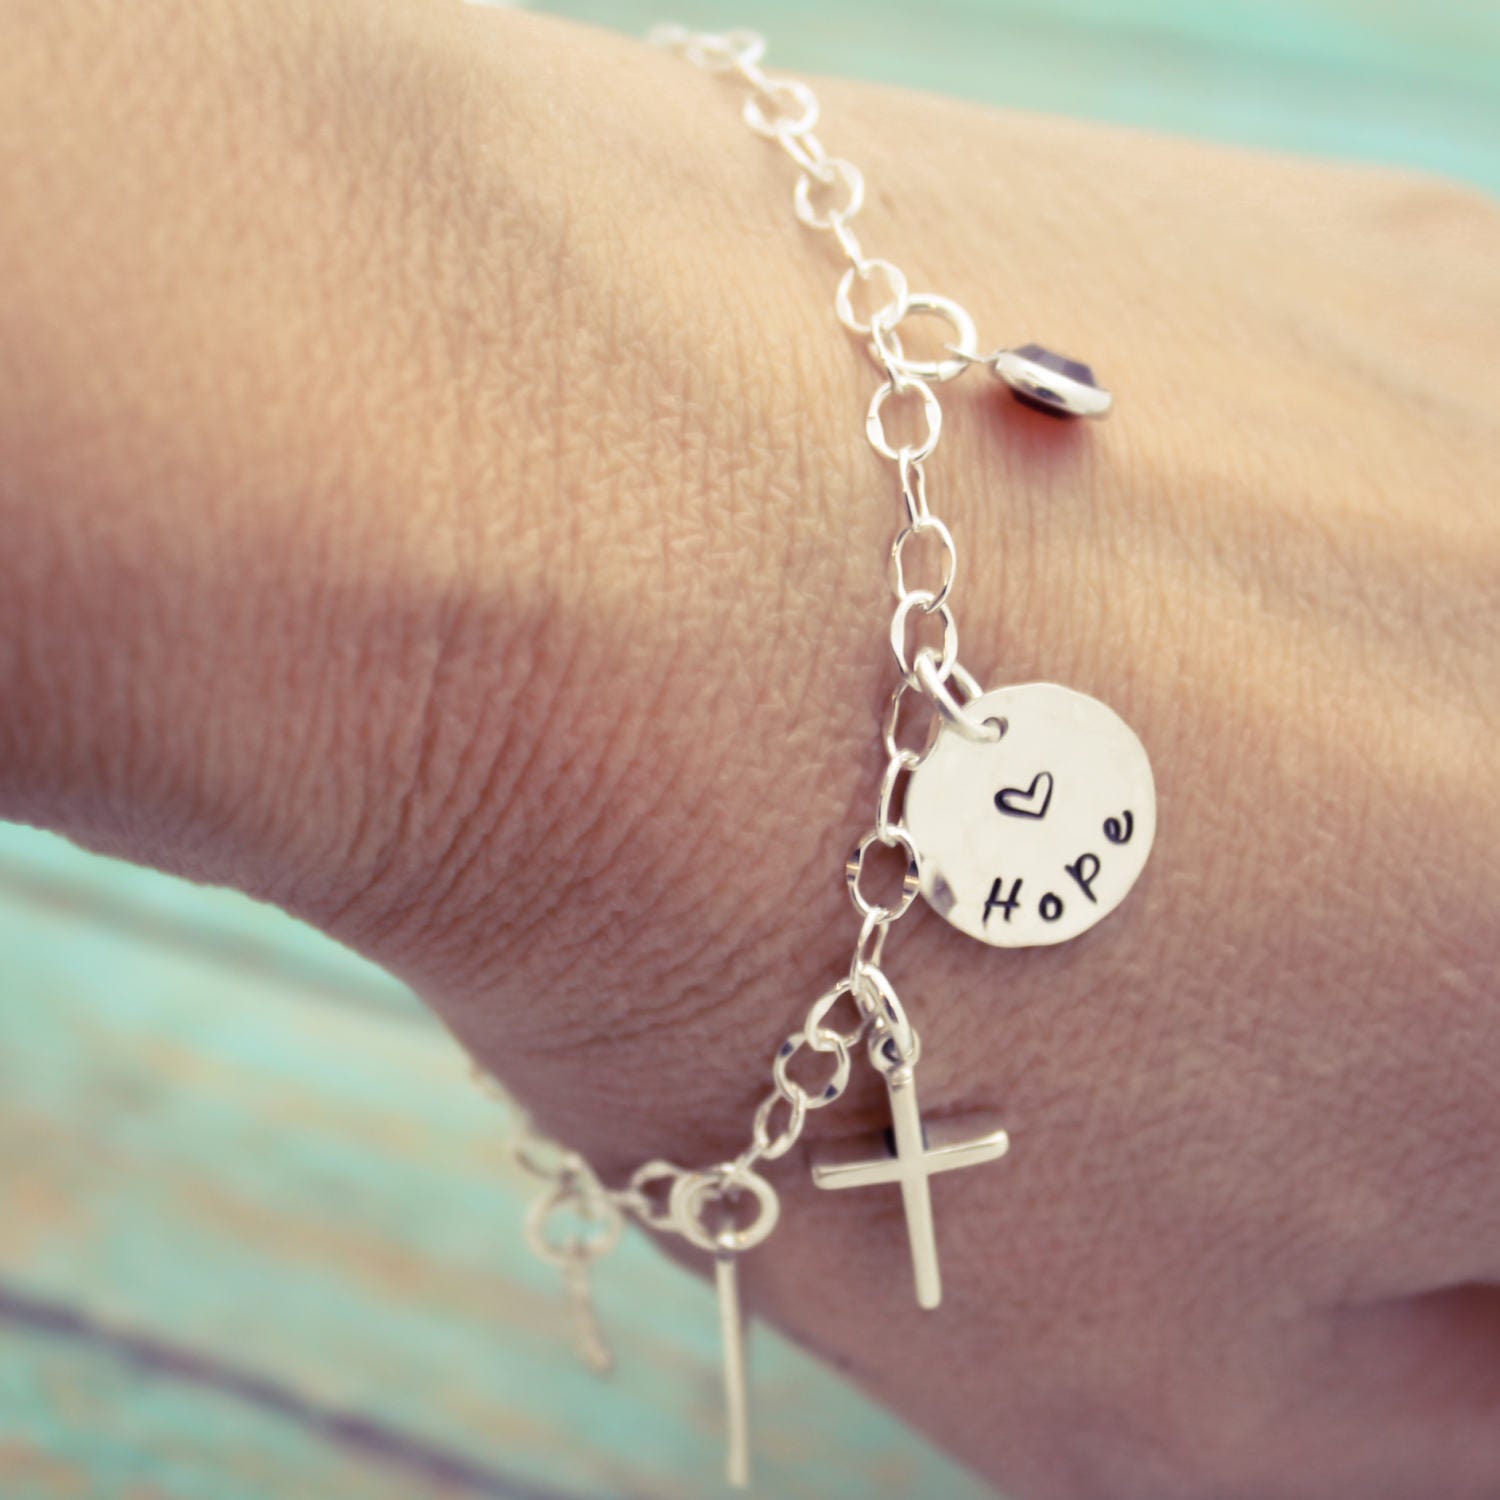 Personalized Confirmation Charm Bracelet, Communion Bracelet, Confirmation Gift, with Date Cross Bracelet Hand Stamped Sterling Silver